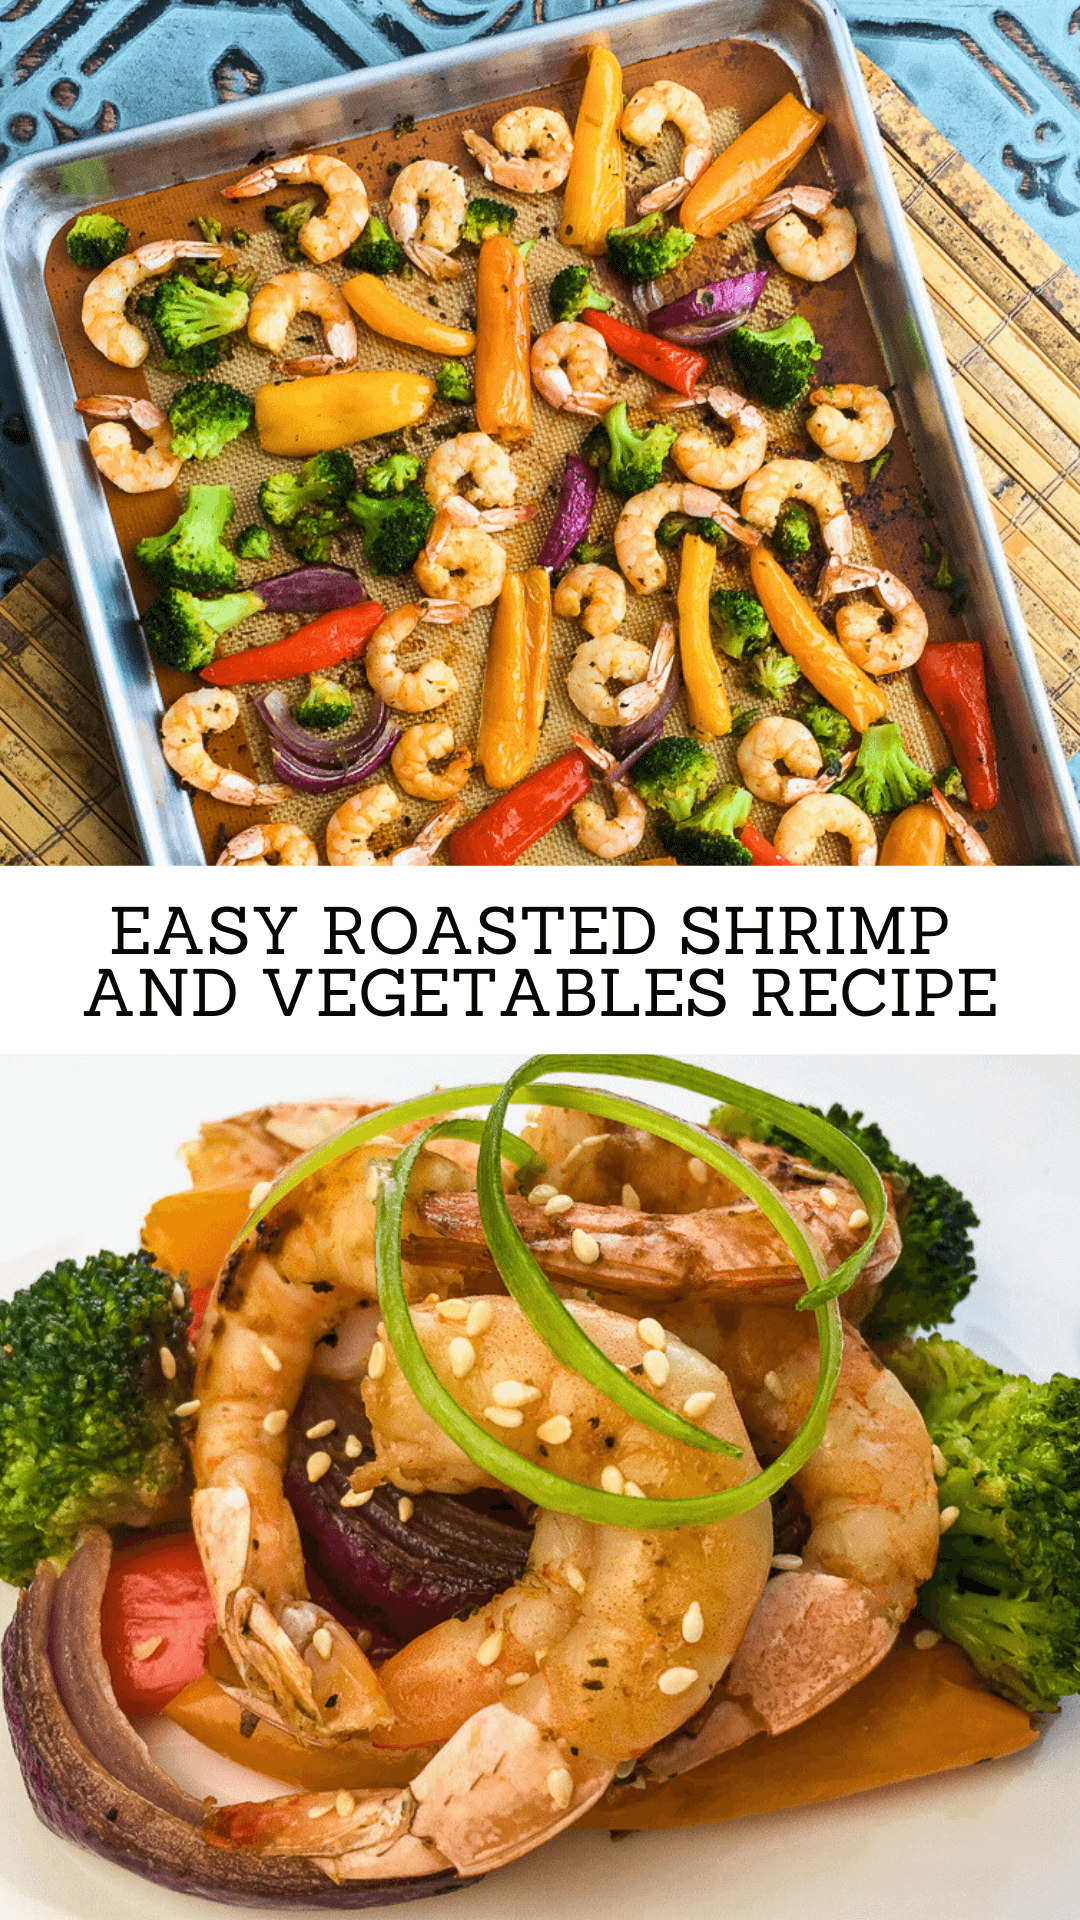 Easy Roasted Shrimp and Vegetables - PIN